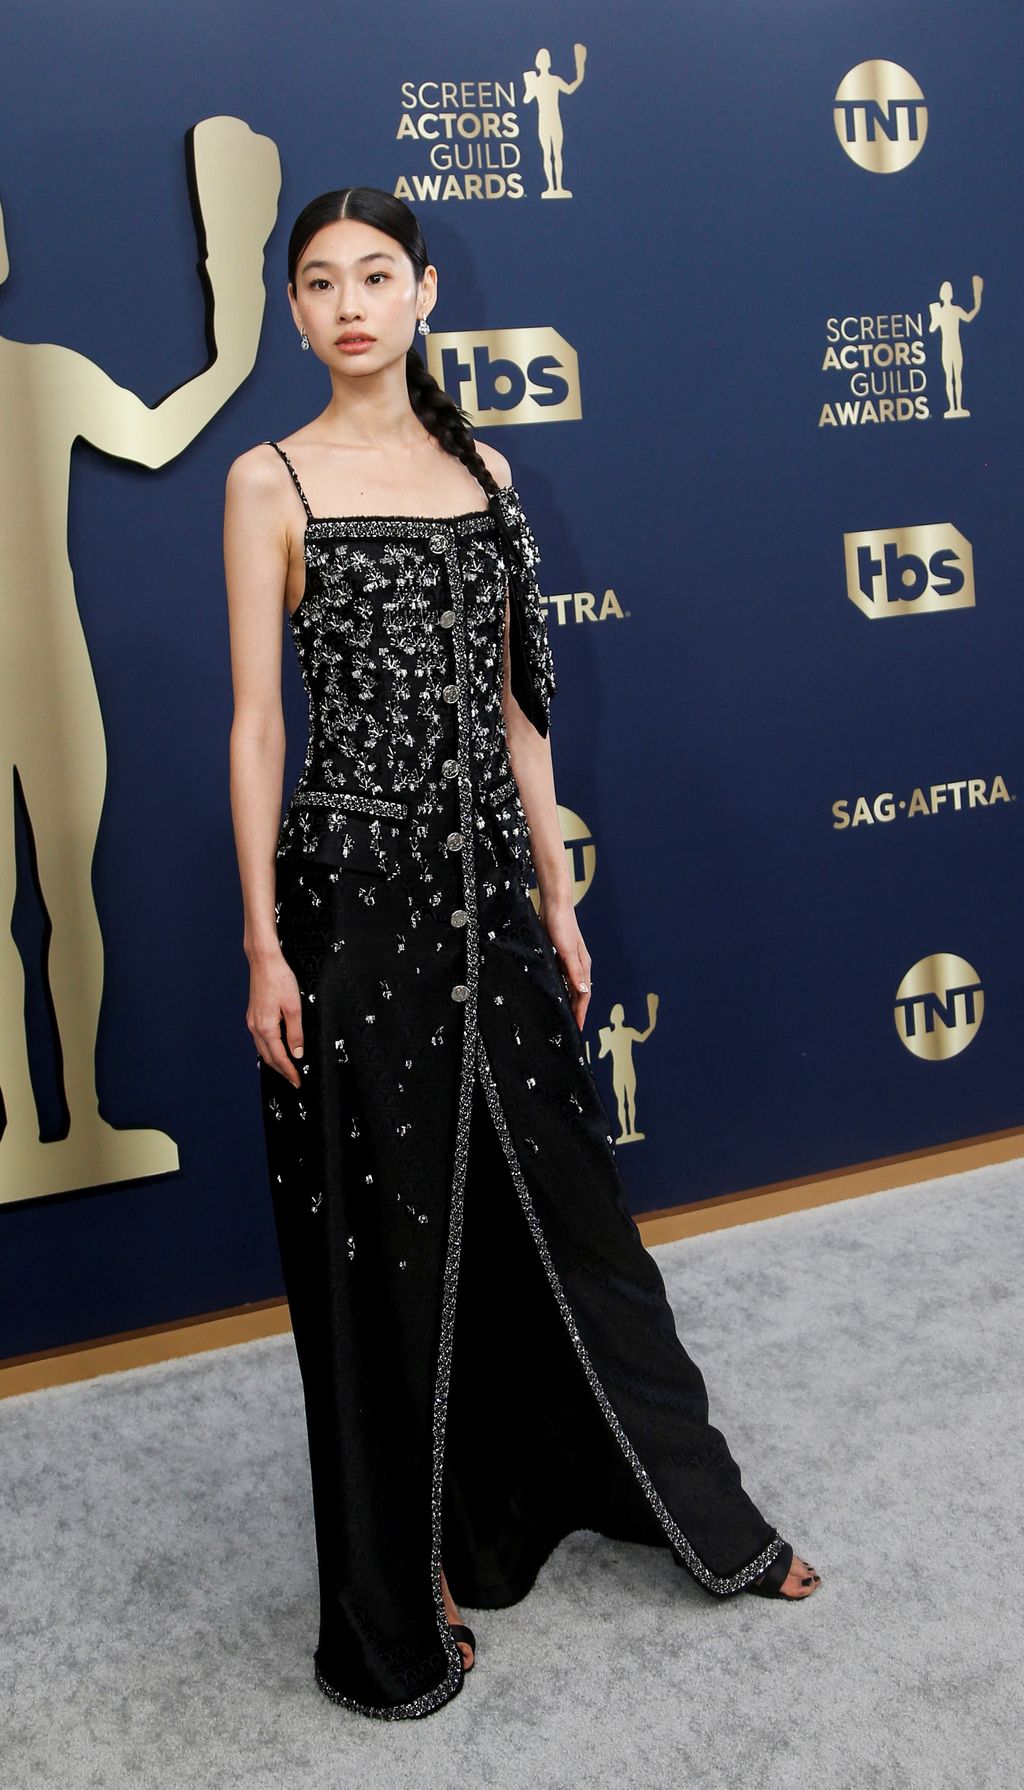 HoYeon Jung attends the 28th Screen Actors Guild Awards, in Santa Monica, California, US, February 27, 2022. REUTERS/Aude Guerrucci